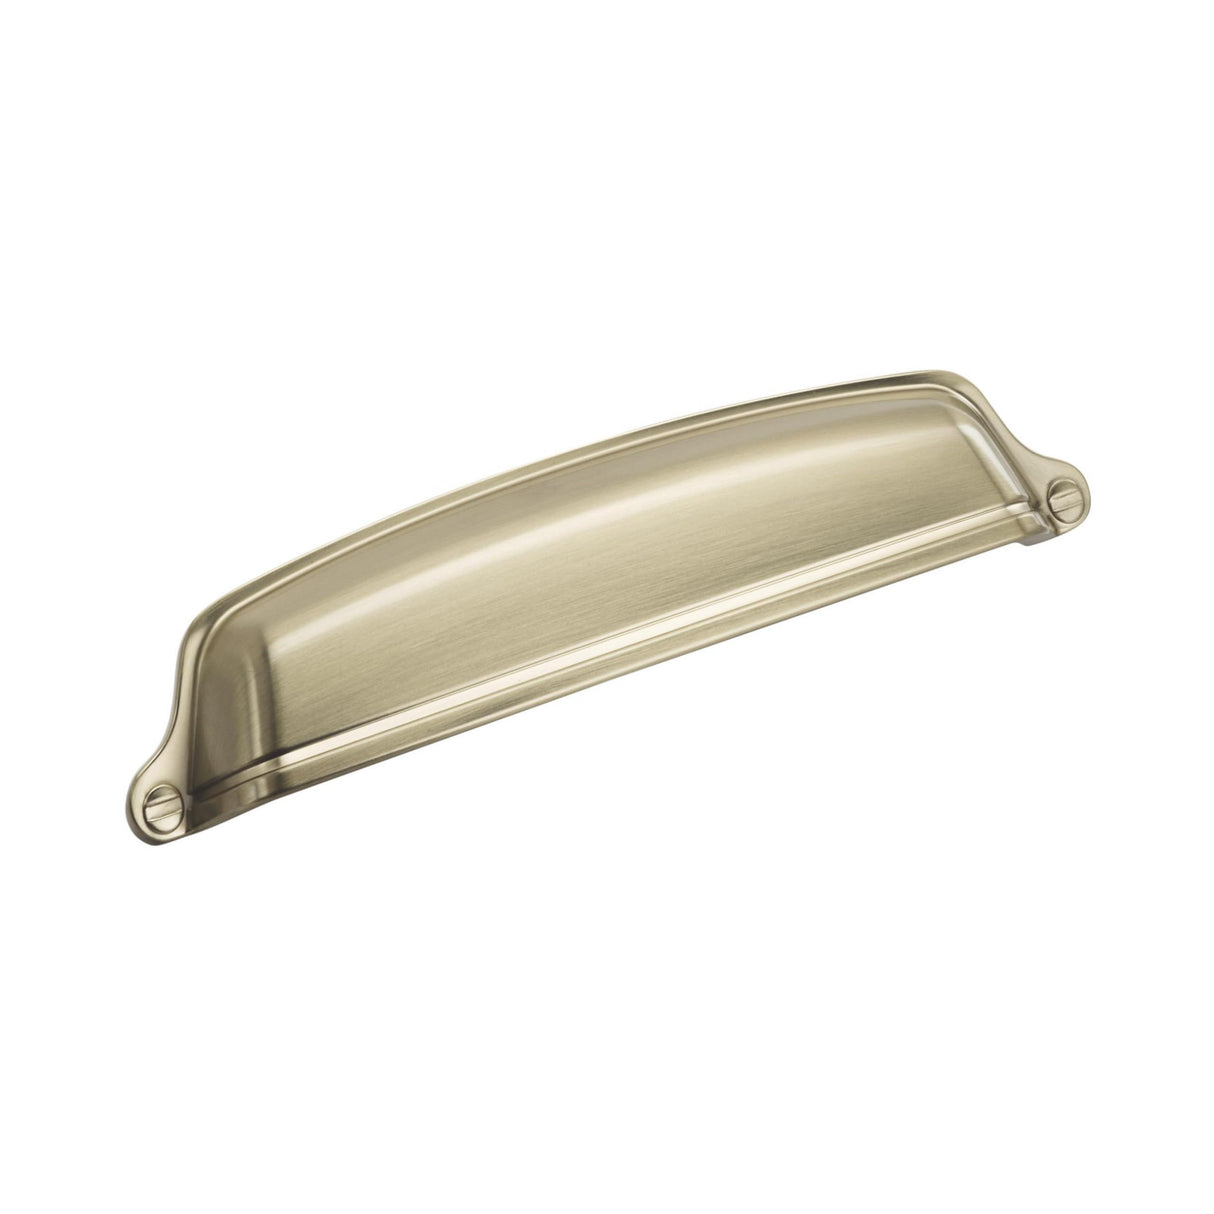 Amerock Cabinet Cup Pull Golden Champagne 5-1/16 inch (128 mm) Center to Center Stature 1 Pack Drawer Pull Drawer Handle Cabinet Hardware